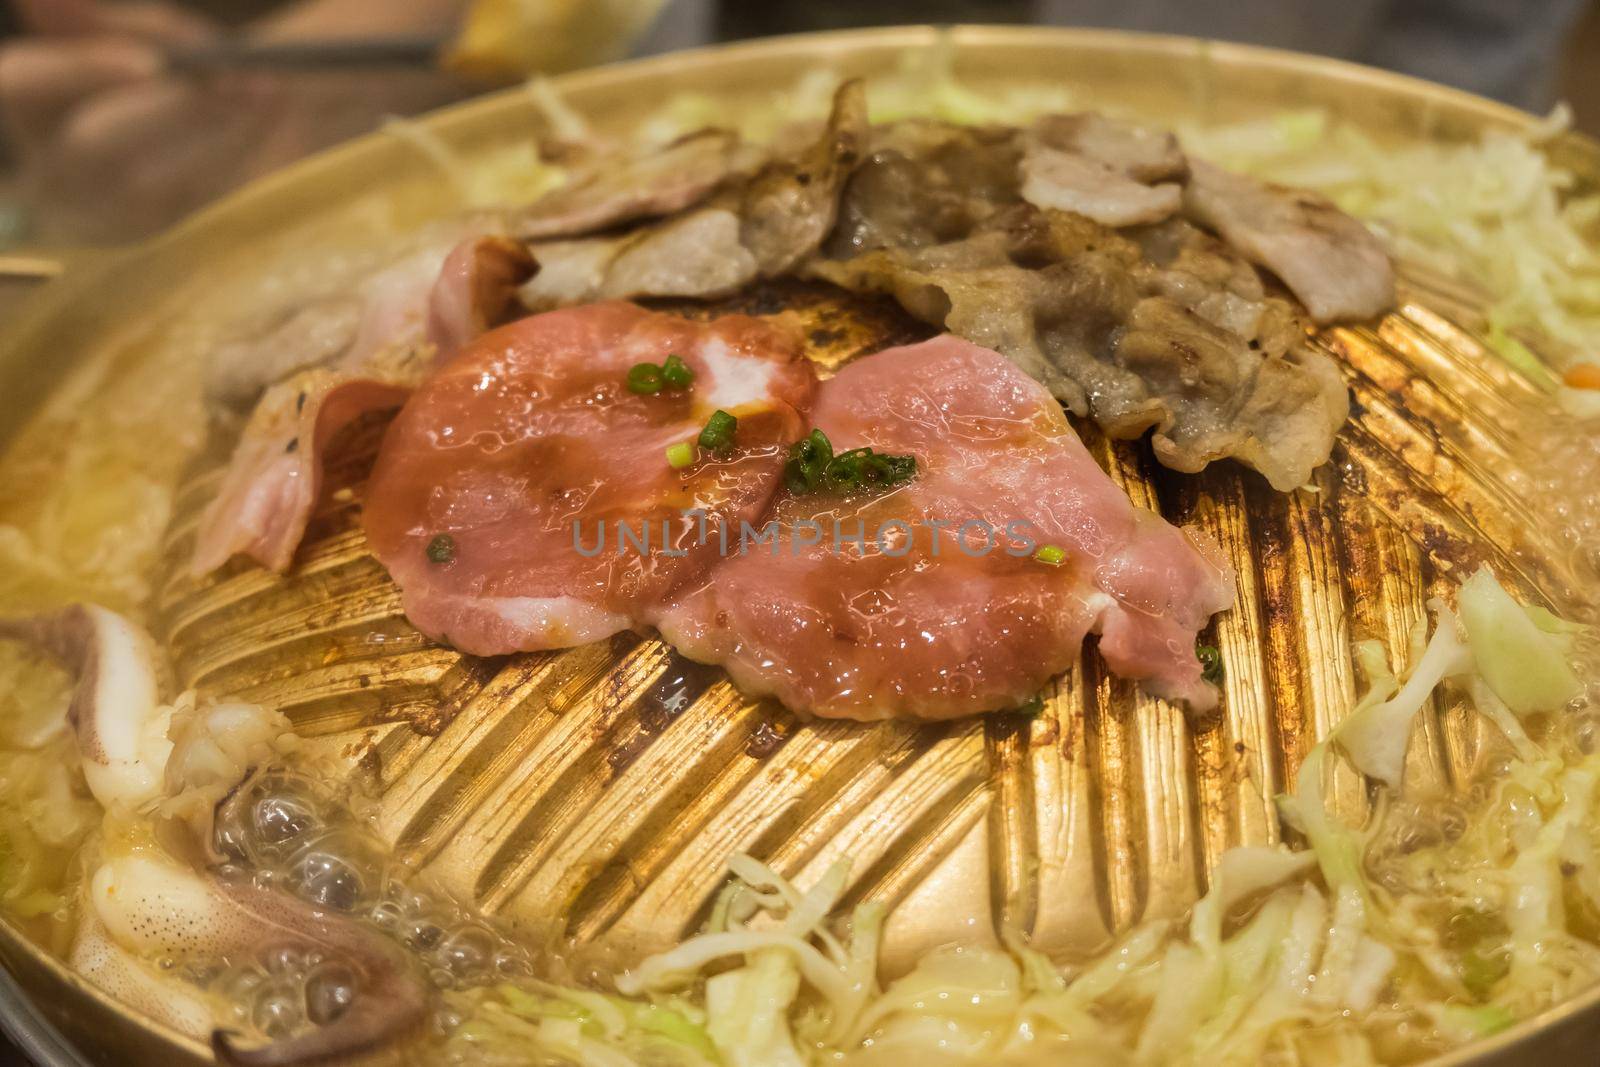 Raw beef slice for barbecue or Japanese style yakiniku by Wmpix